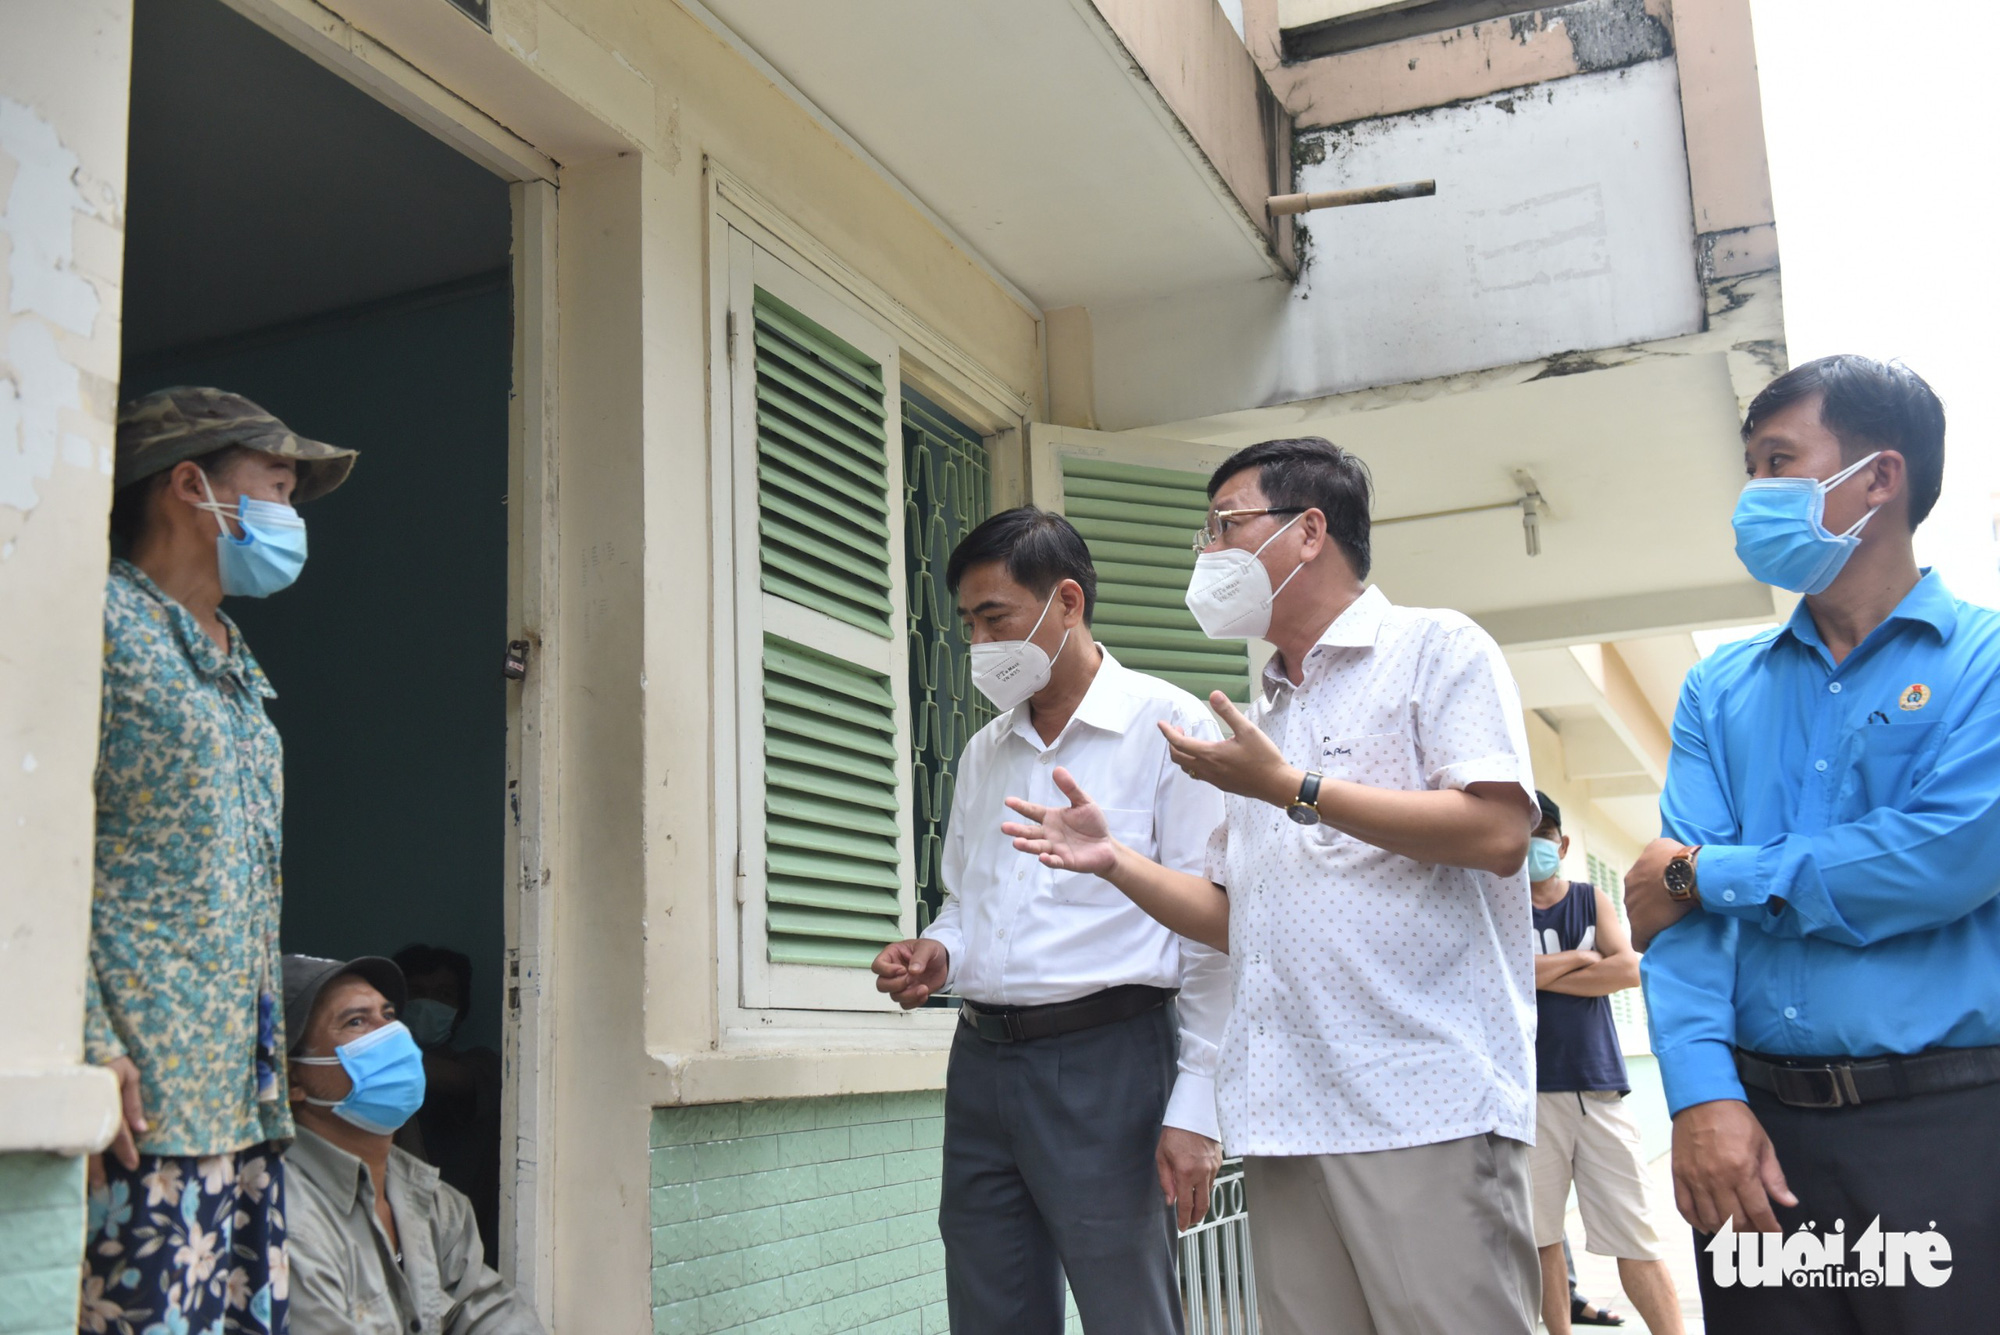 Officials visit residents at their new home in Binh Thanh District, Ho Chi Minh City, August 26, 2021. Photo: Duyen Phan / Tuoi Tre